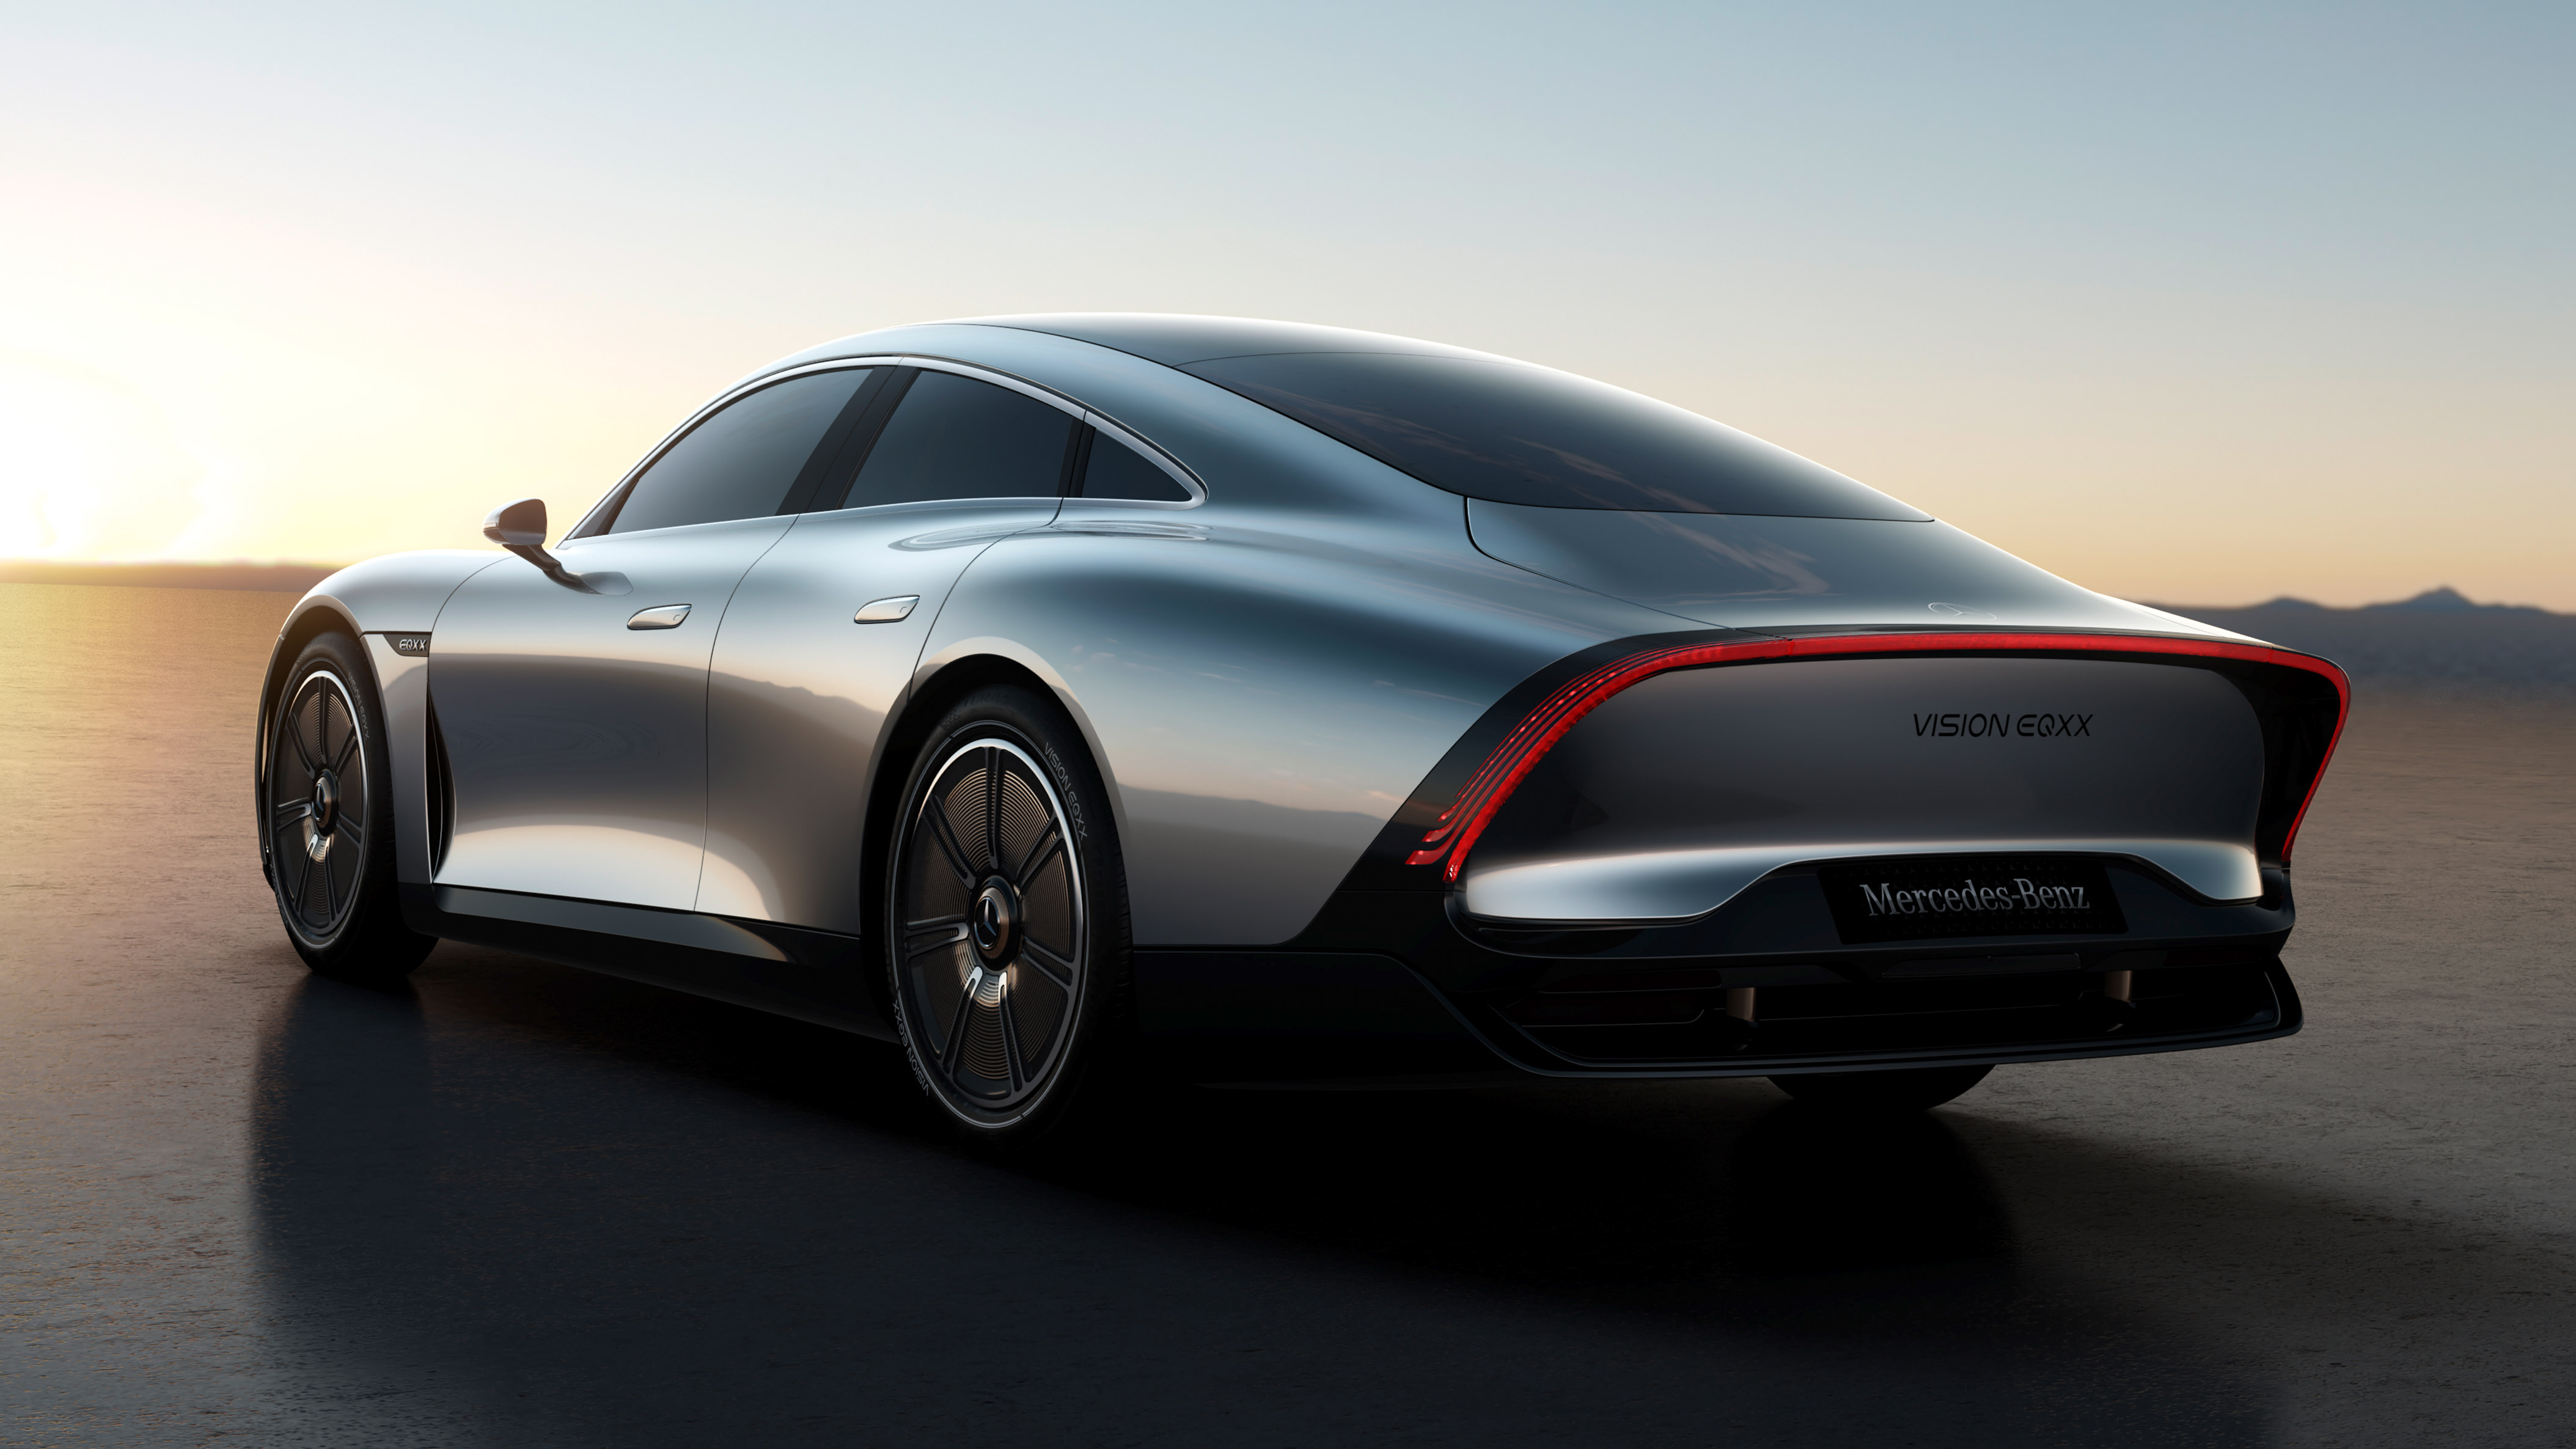 Rear view of Mercedes Vision EQXX